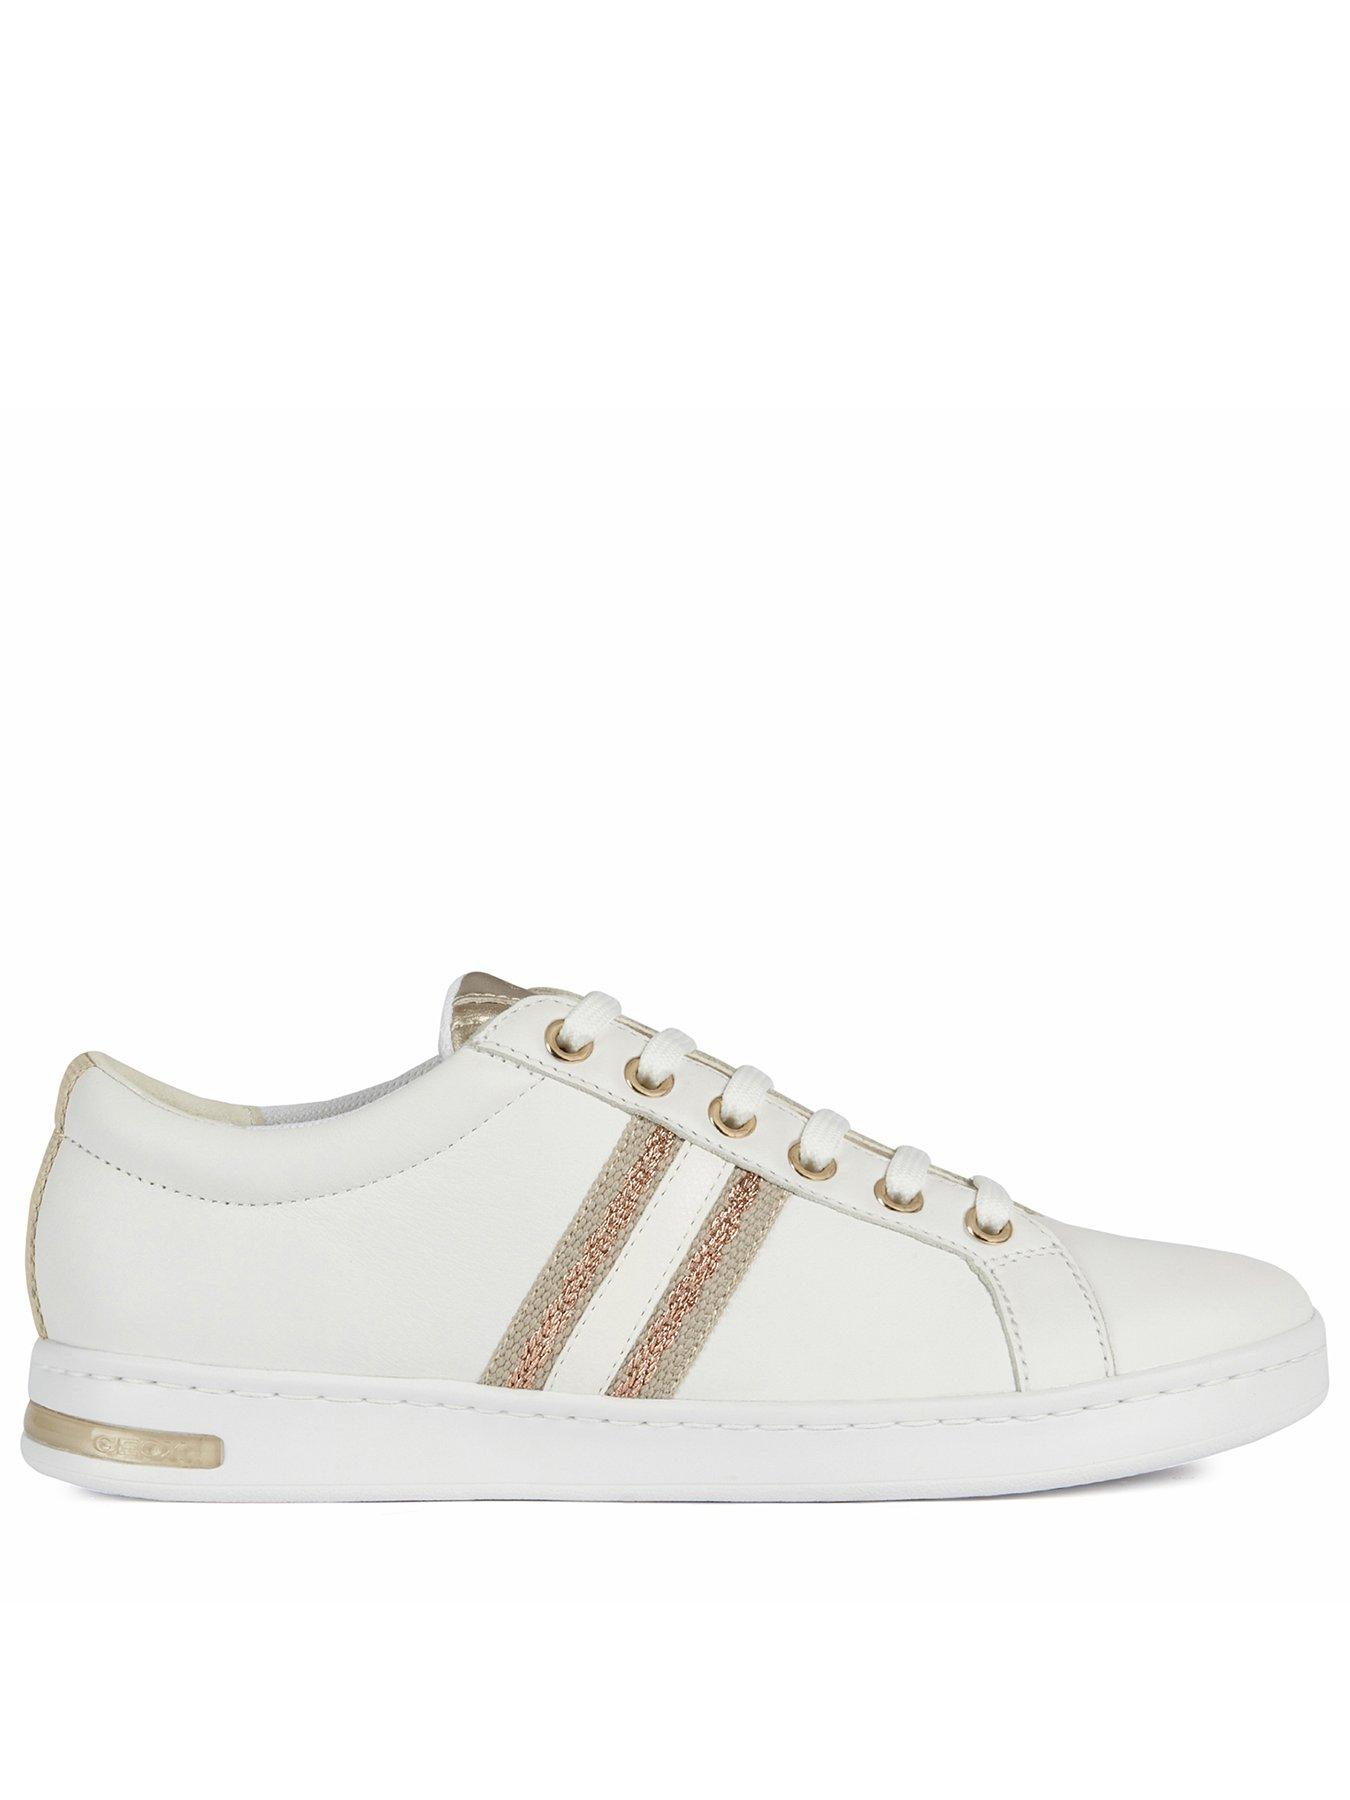 geox rose gold trainers